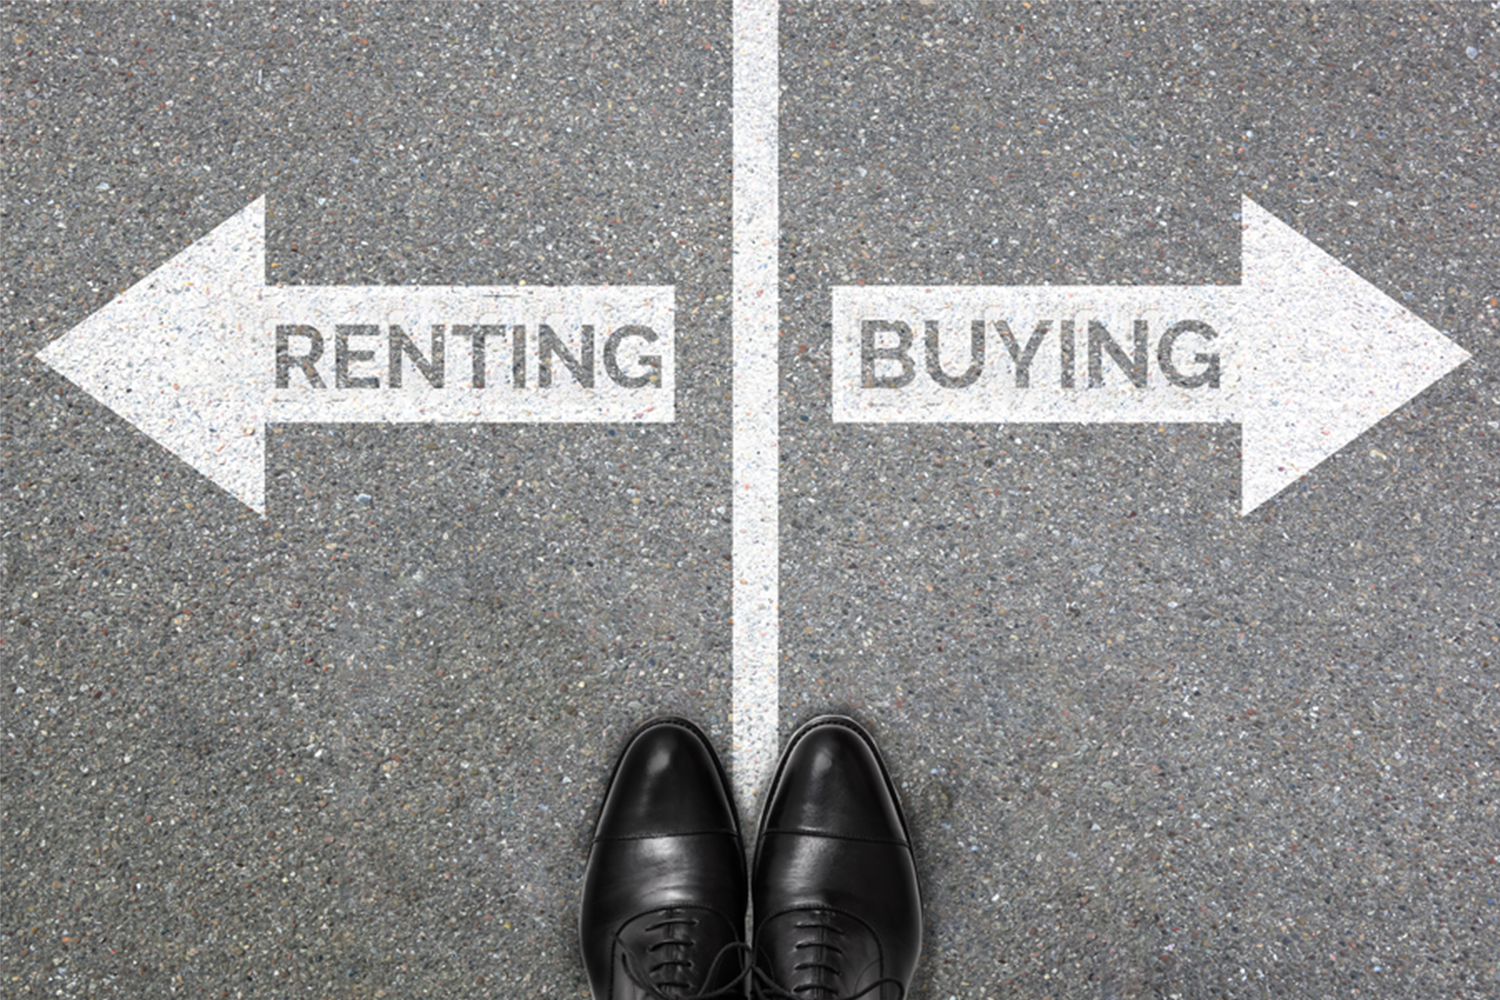 Business person deciding between renting or buying